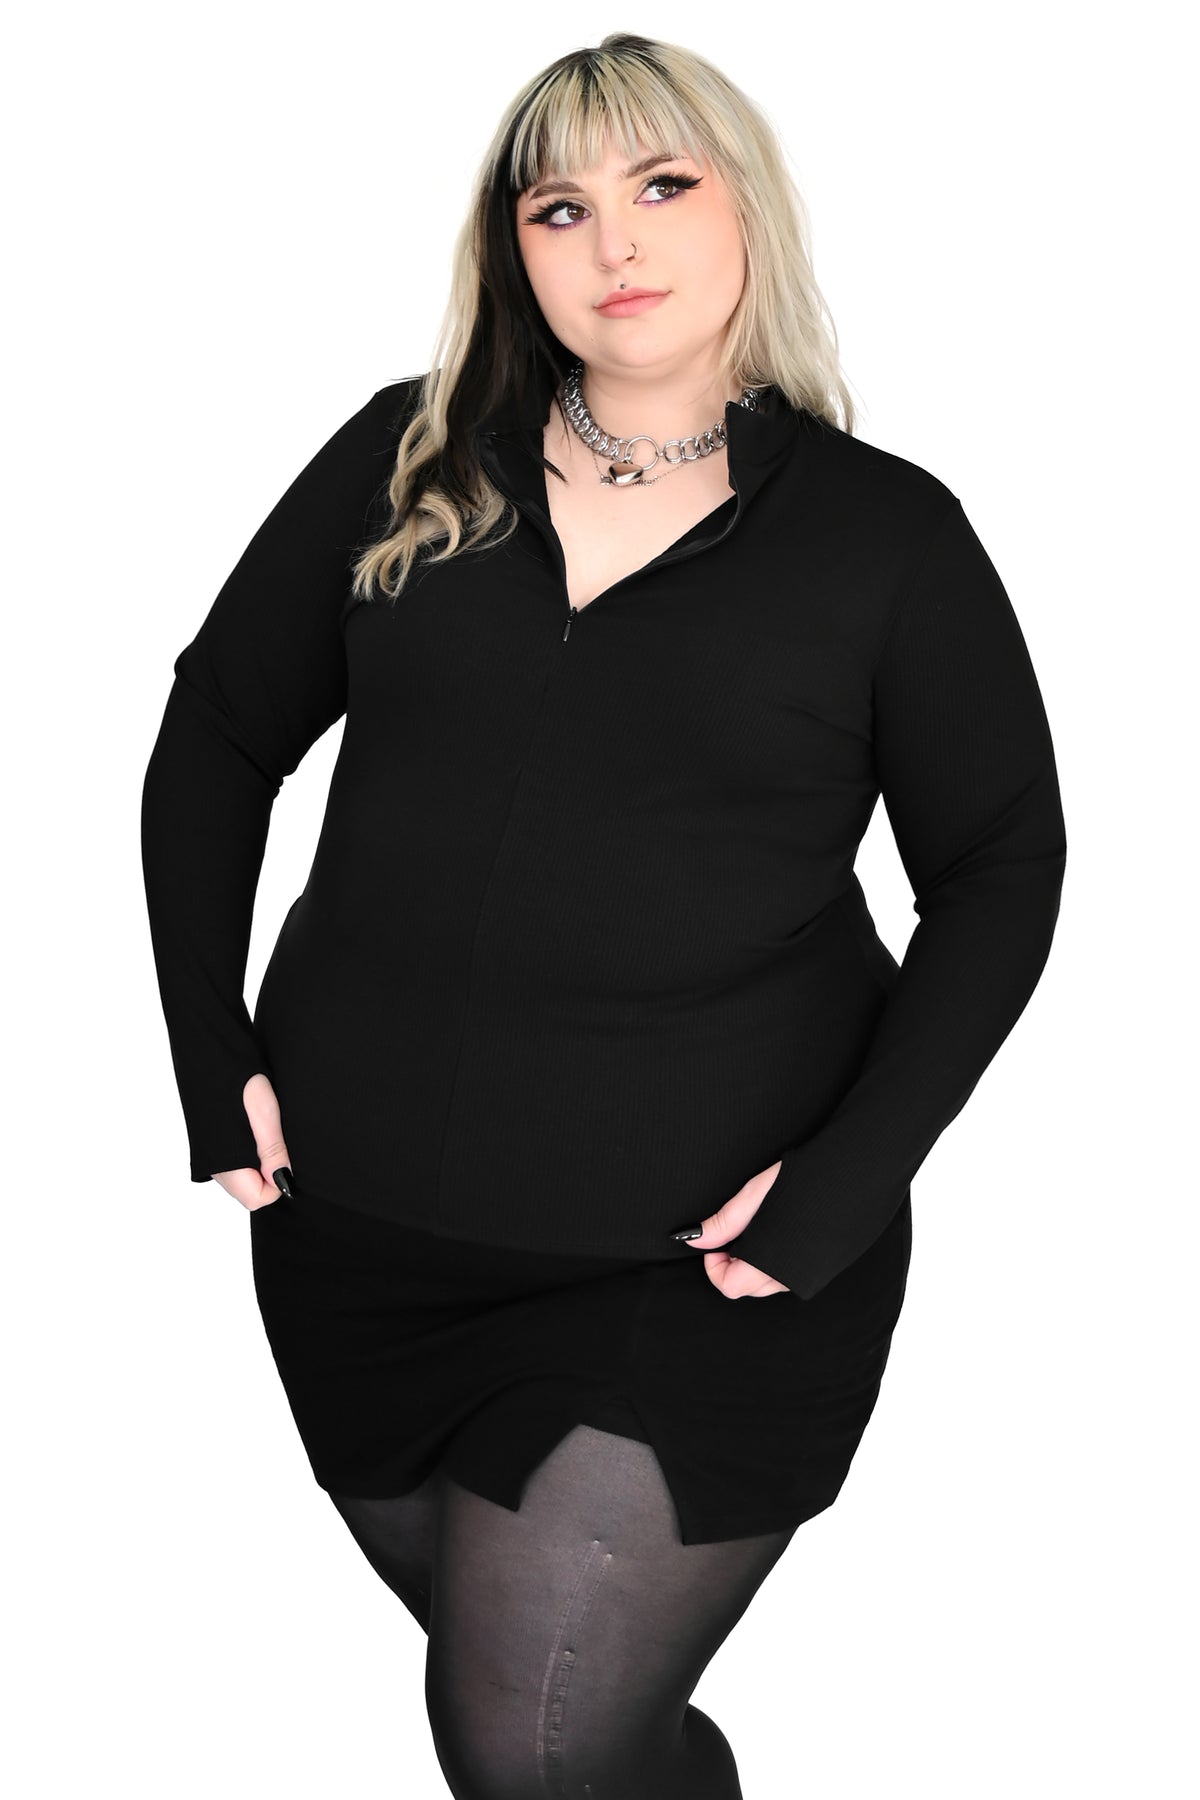 black ribbed long sleeve top with half zipper and thumbholes